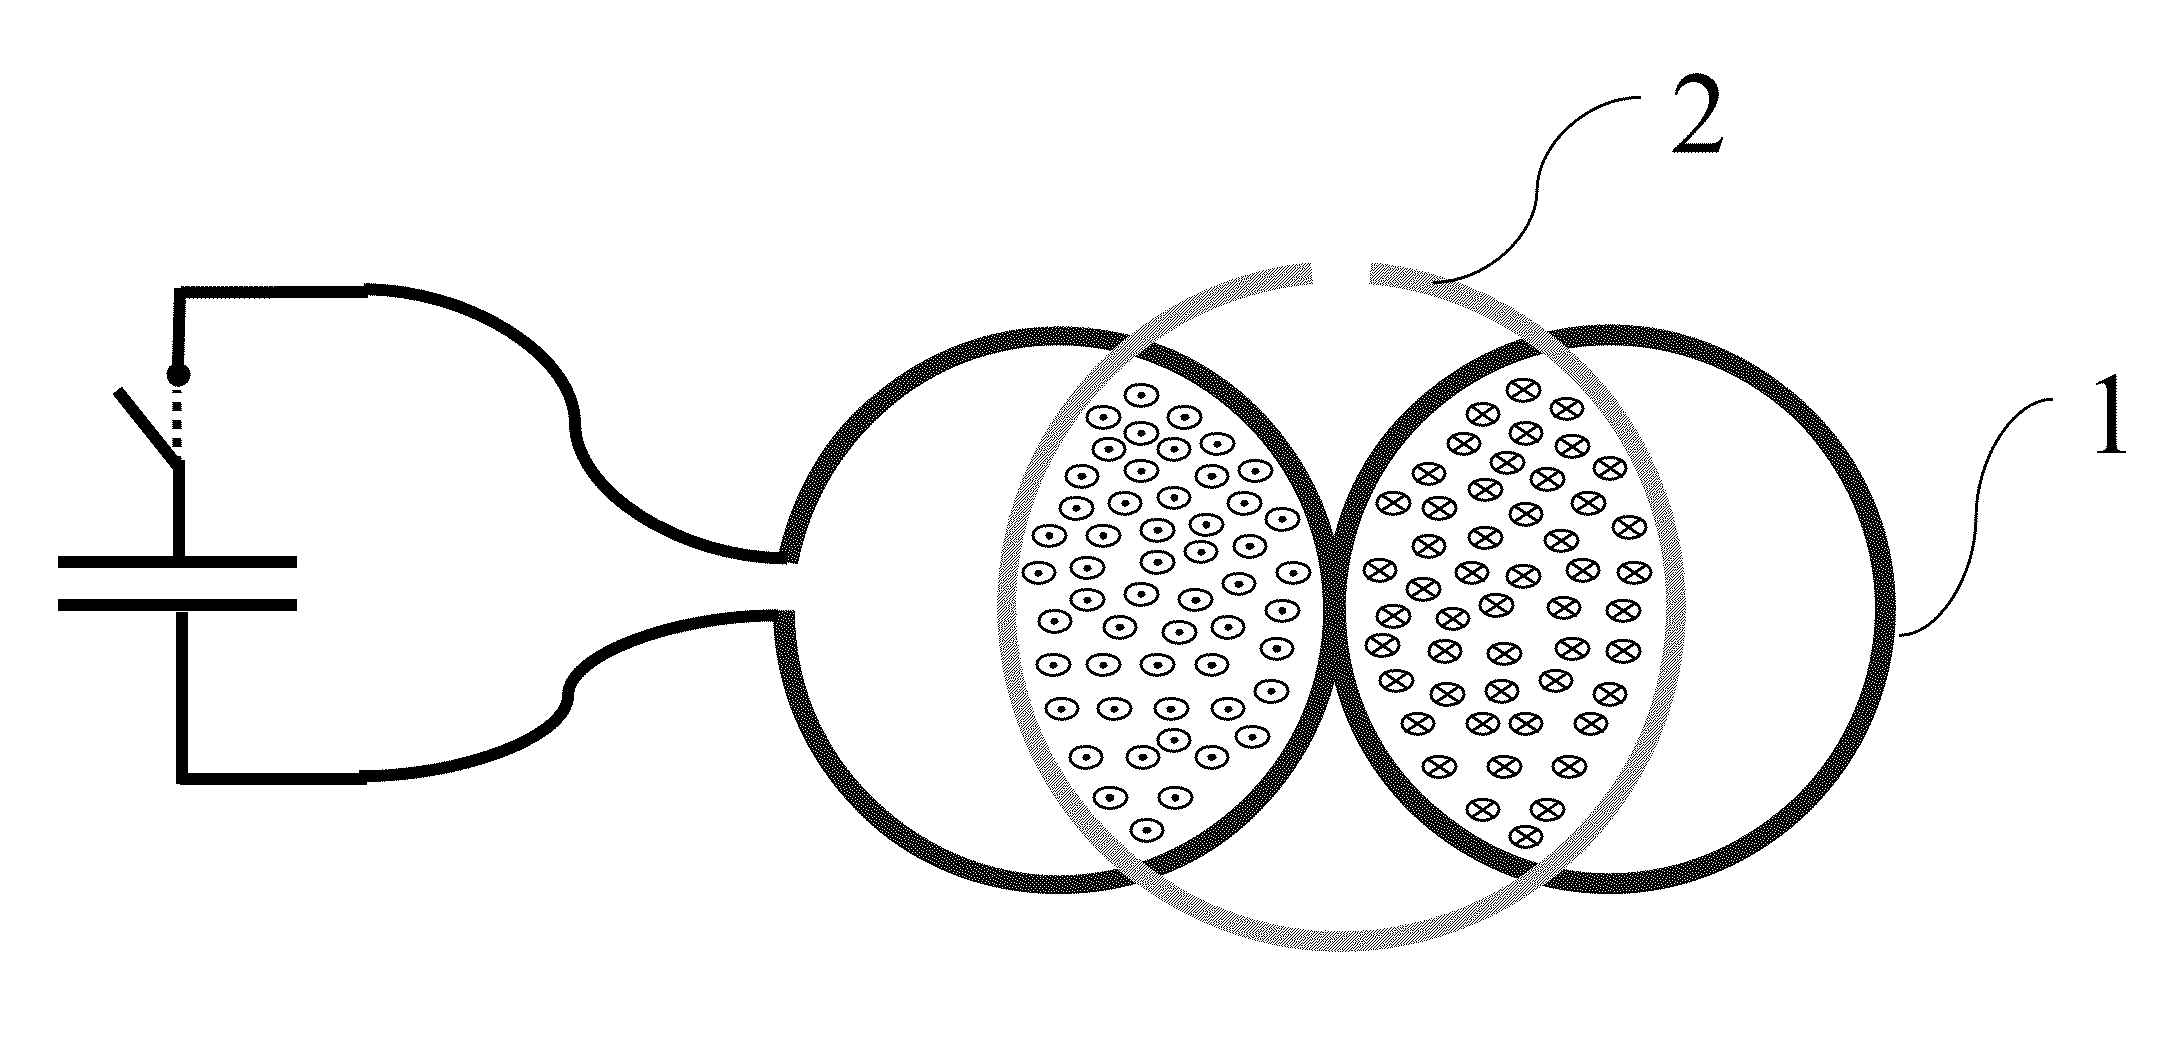 Magnetic Stimulation coils with electrically conducting structures